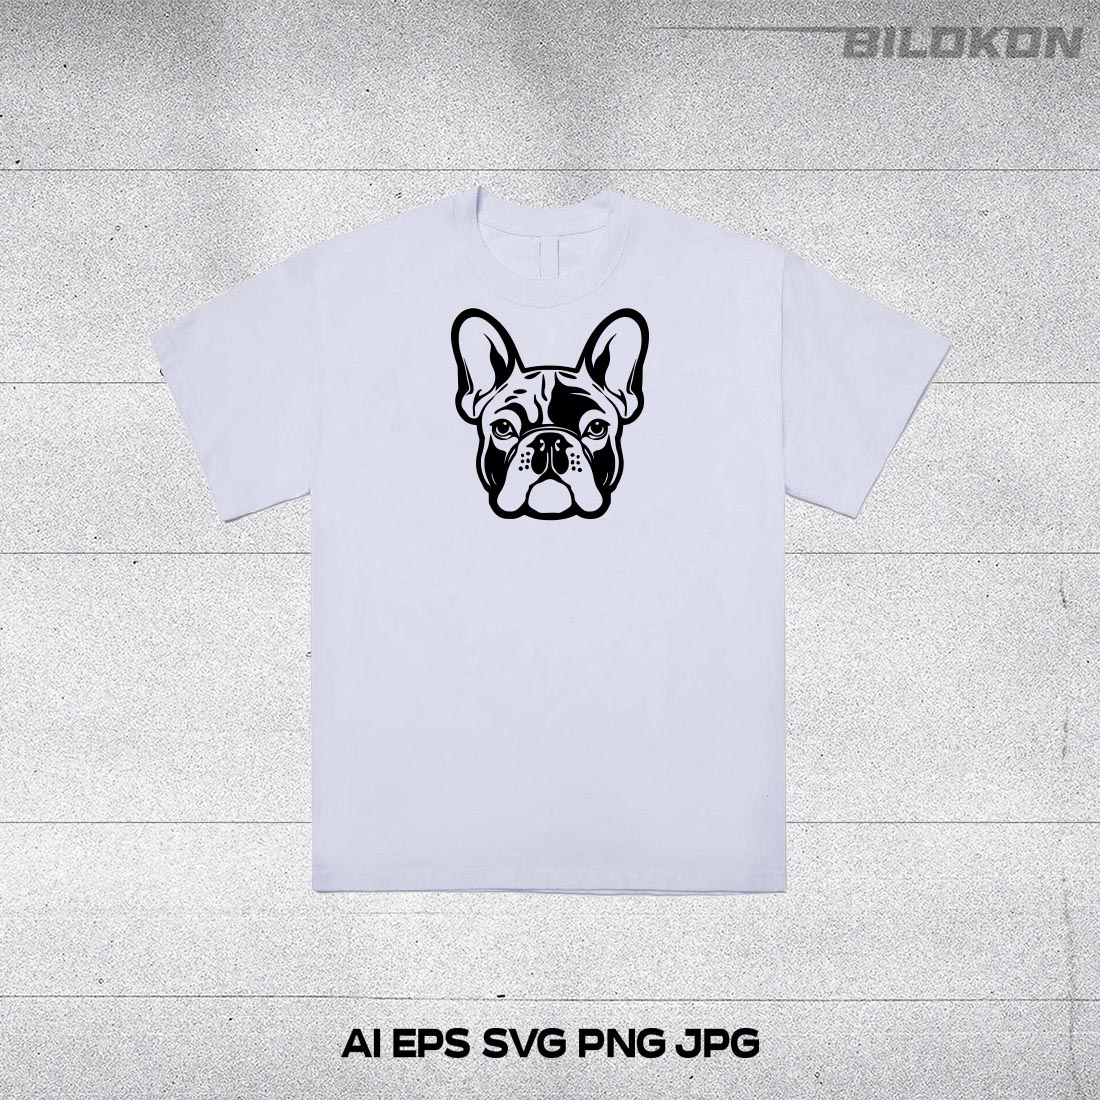 White t - shirt with a black bulldog on it.